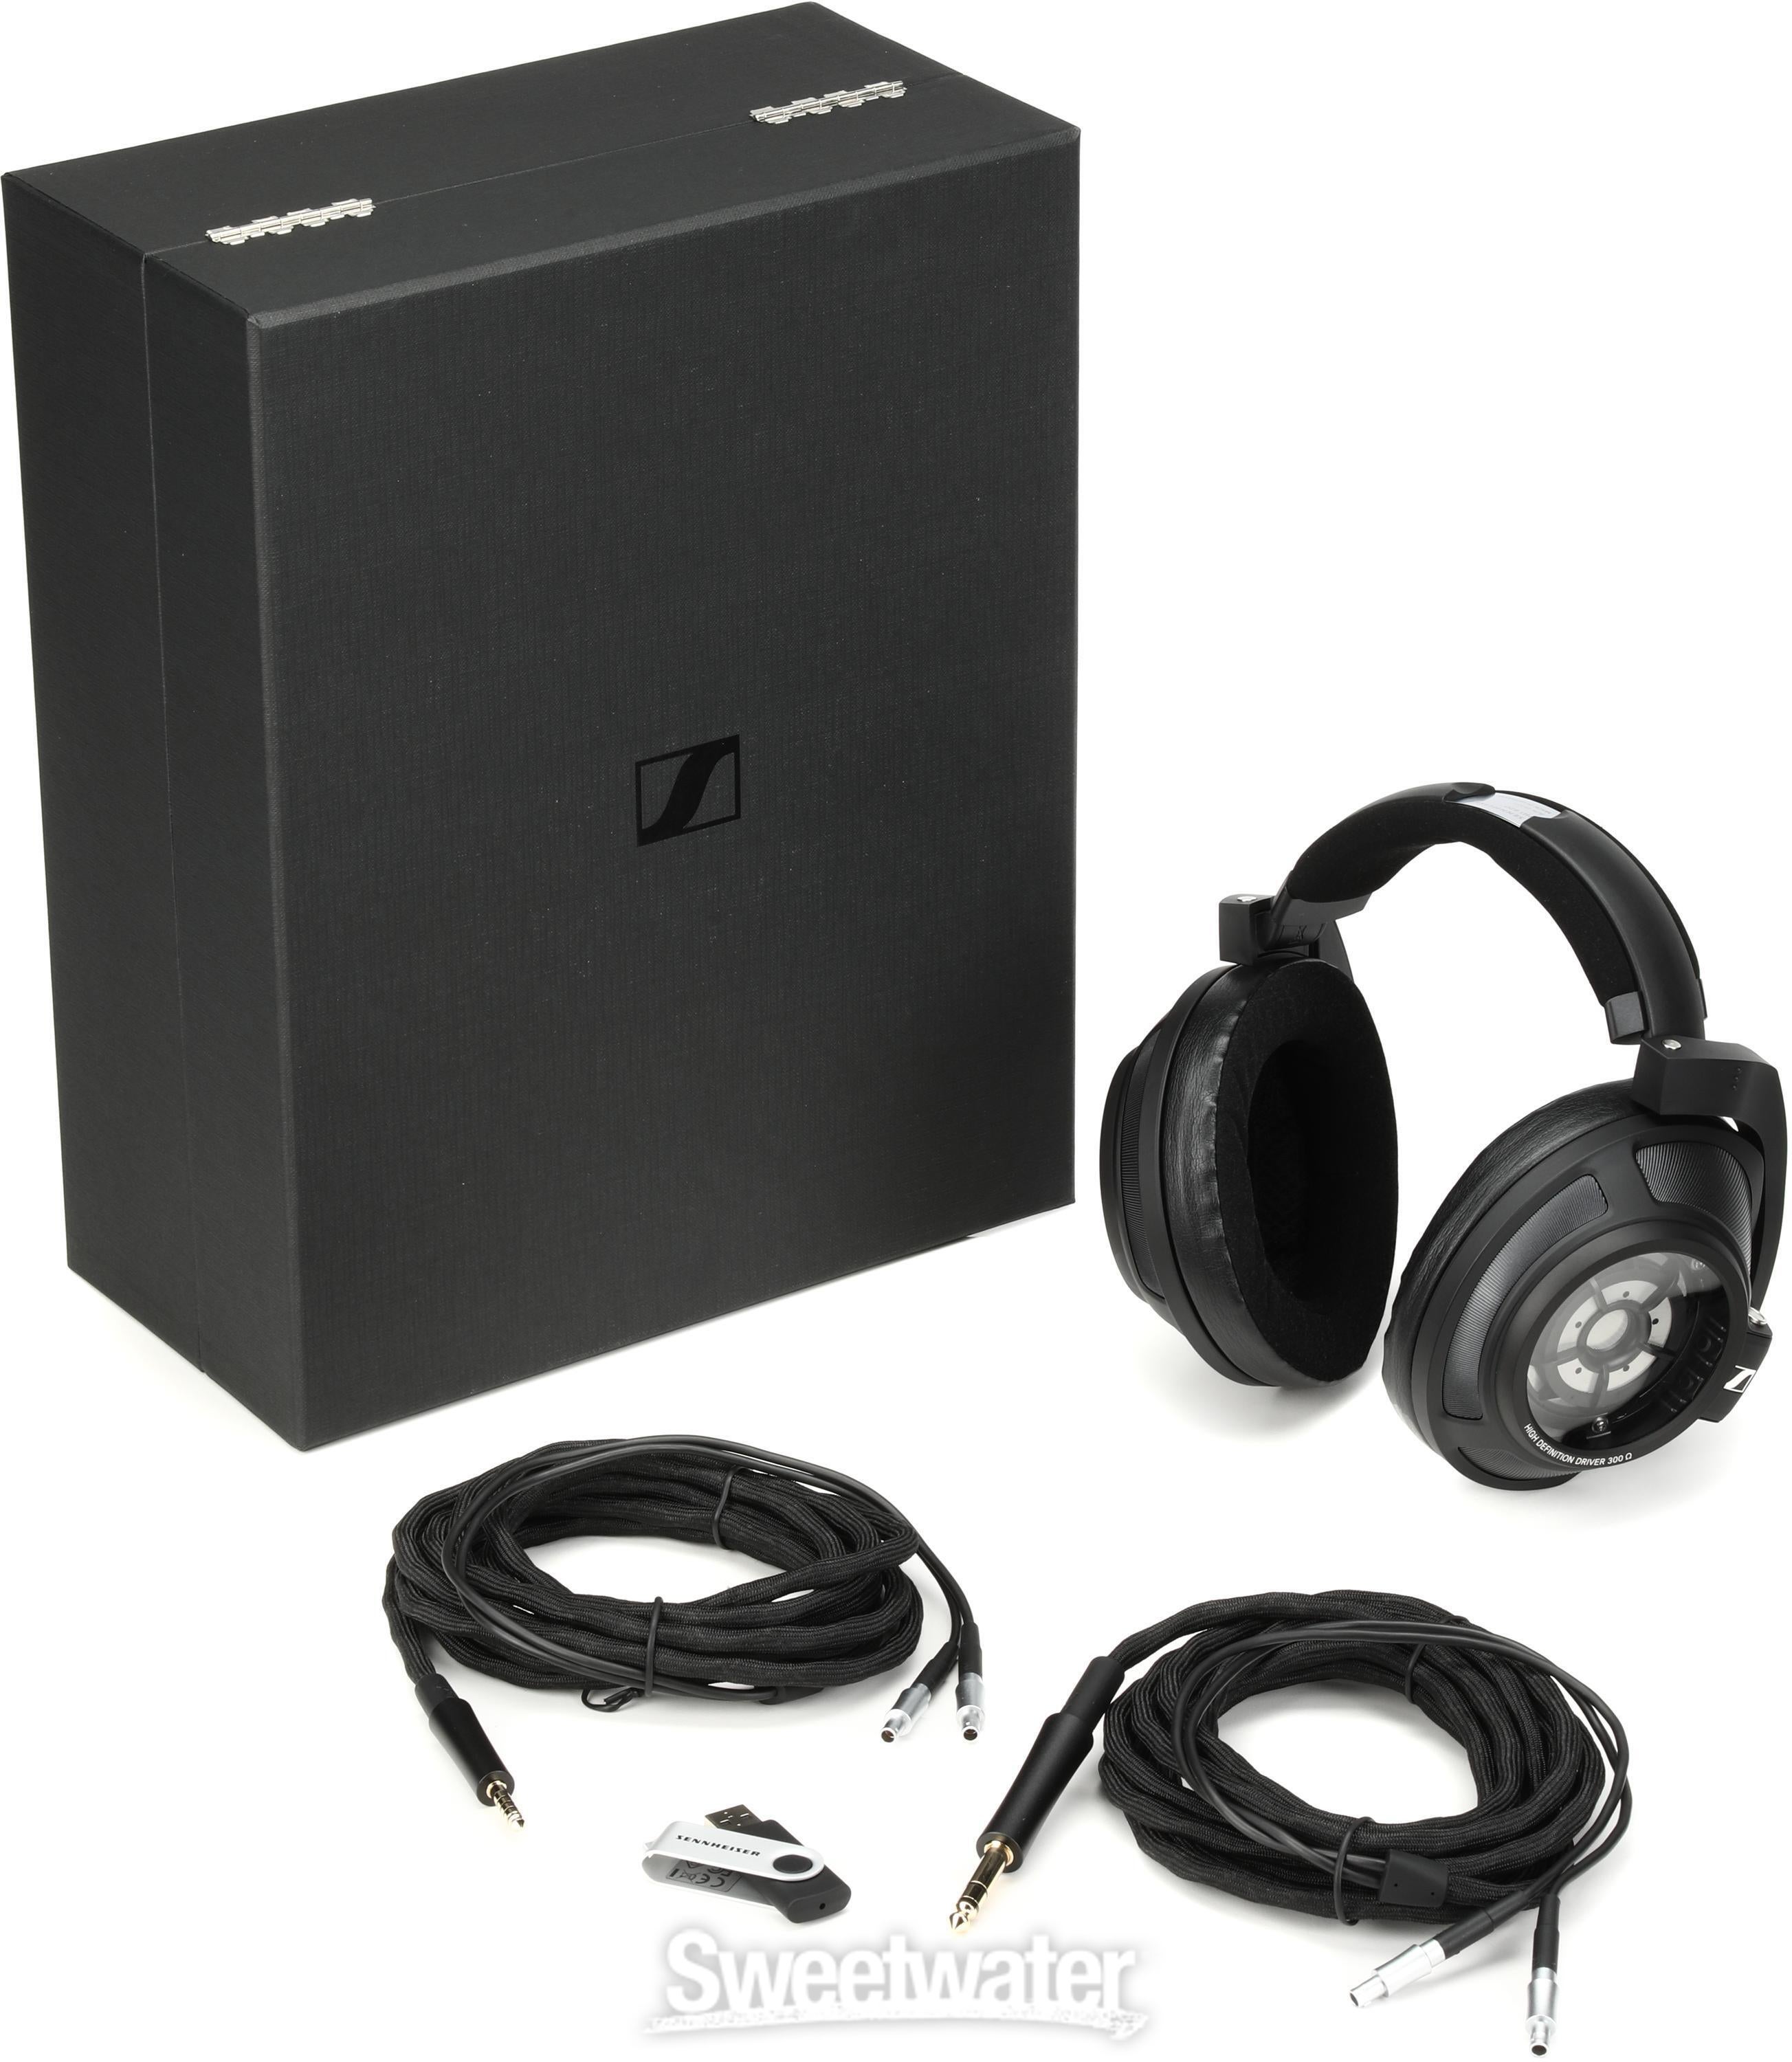 Sennheiser HD 820 Closed-back Audiophile and Reference Headphones